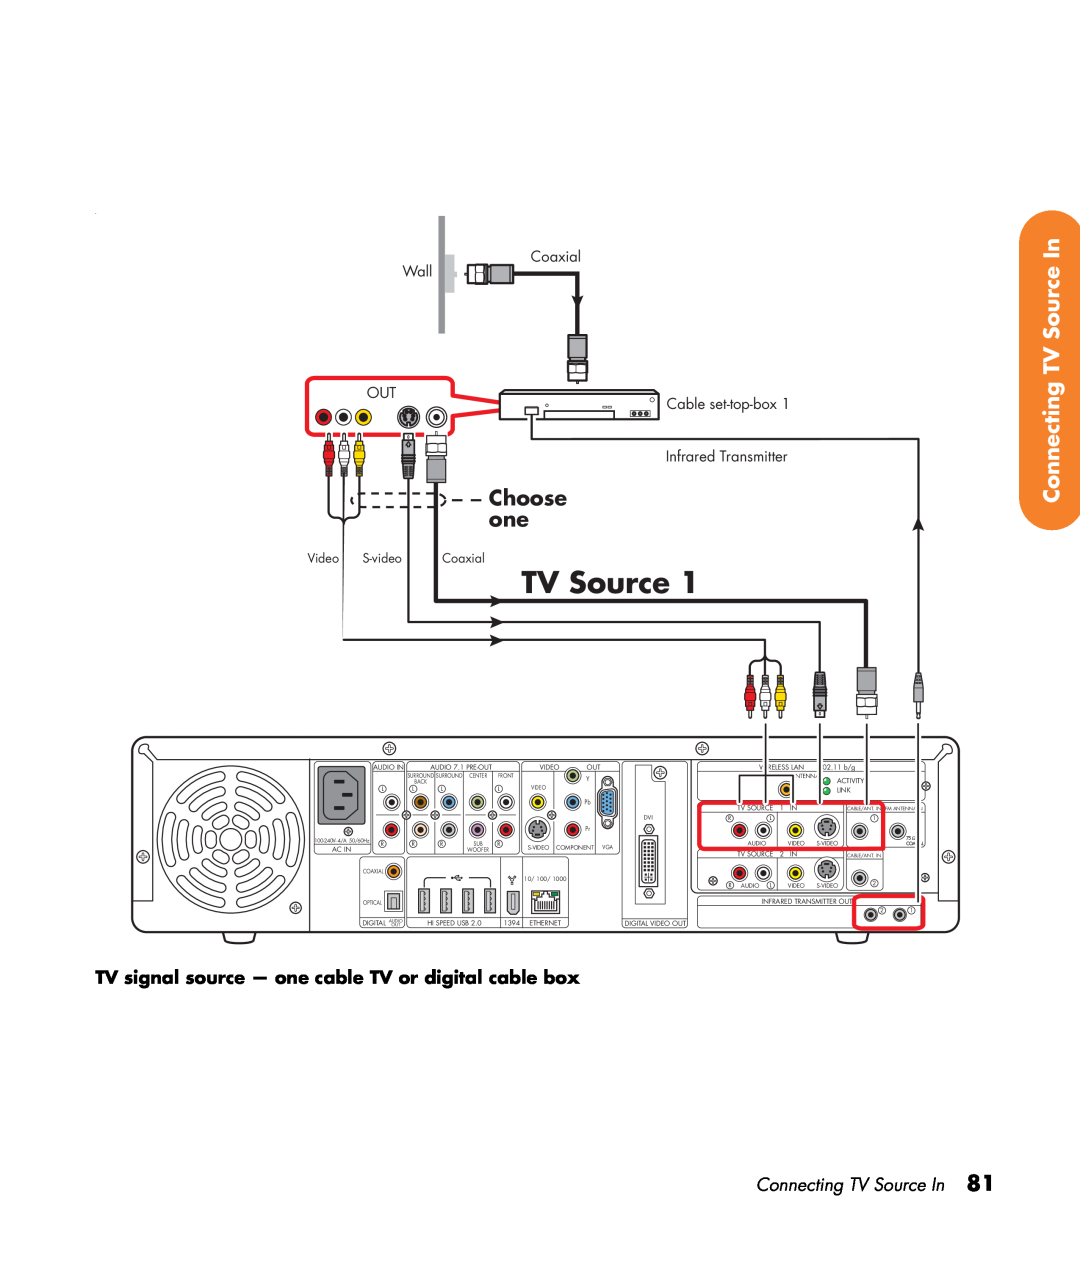 HP z552, z557 Choose one, TV signal source - one cable TV or digital cable box, Connecting TV Source In, Video S-video 